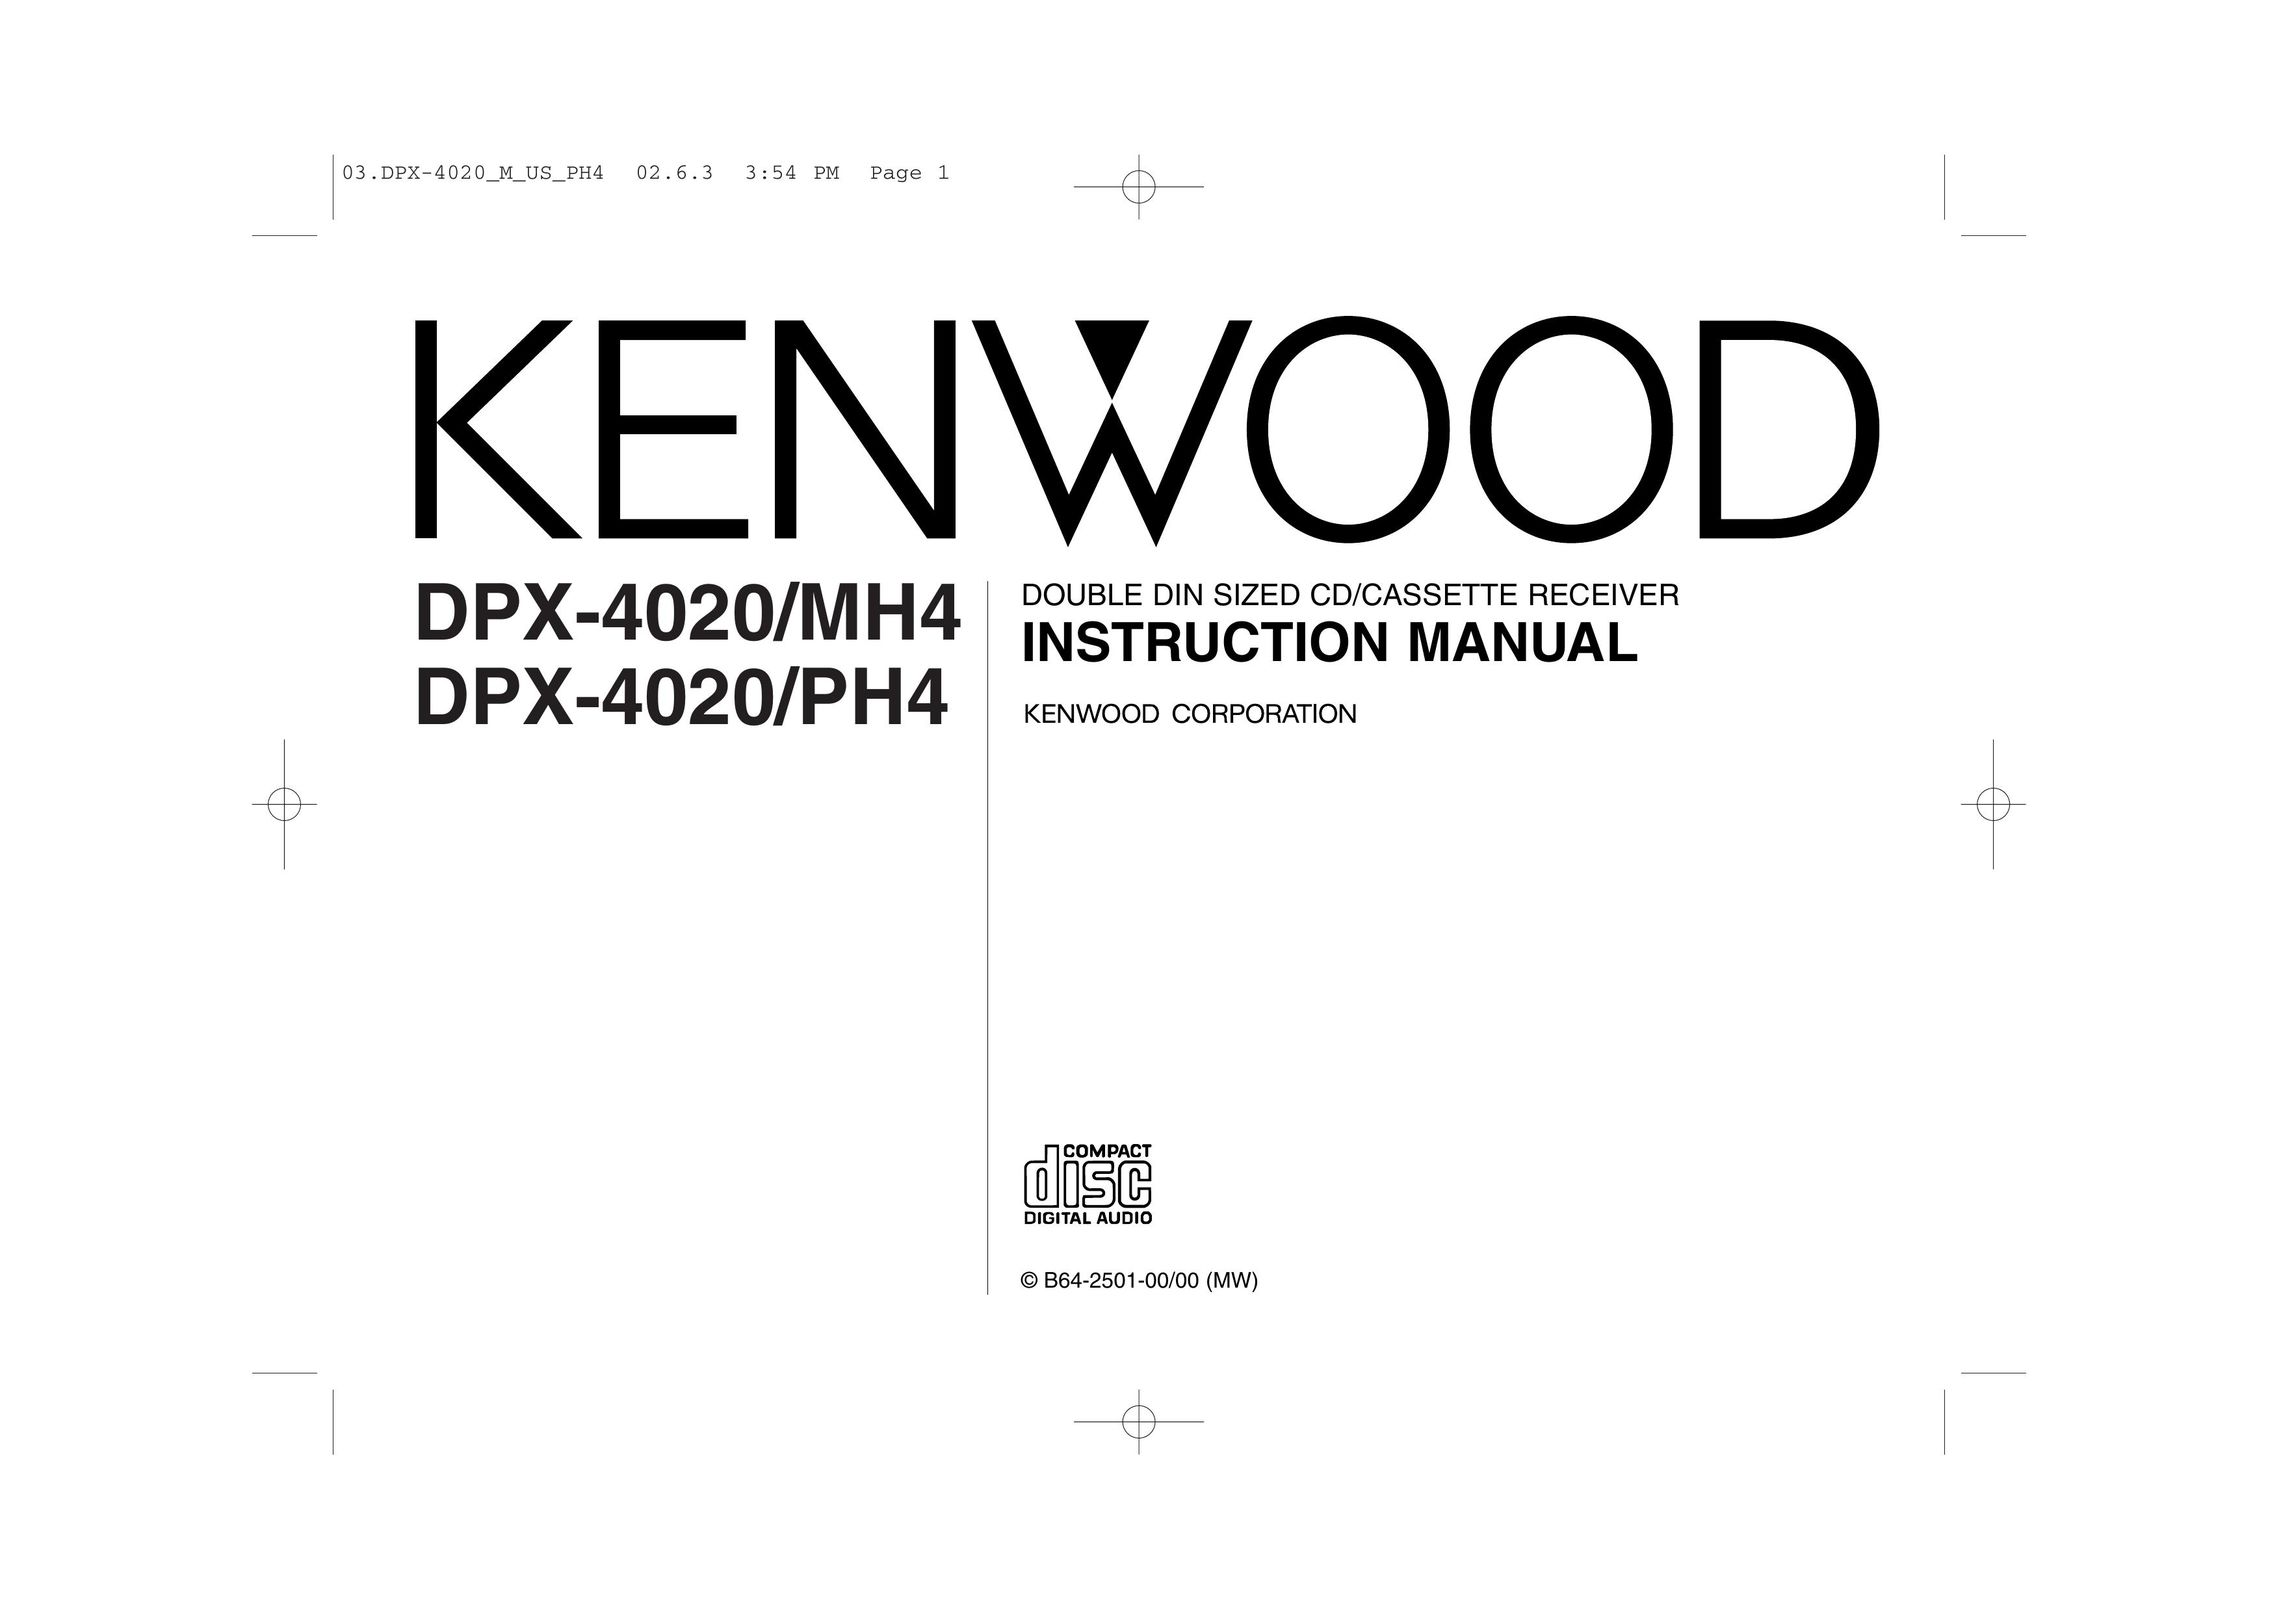 Kenwood DPX-4020 Car Stereo System User Manual